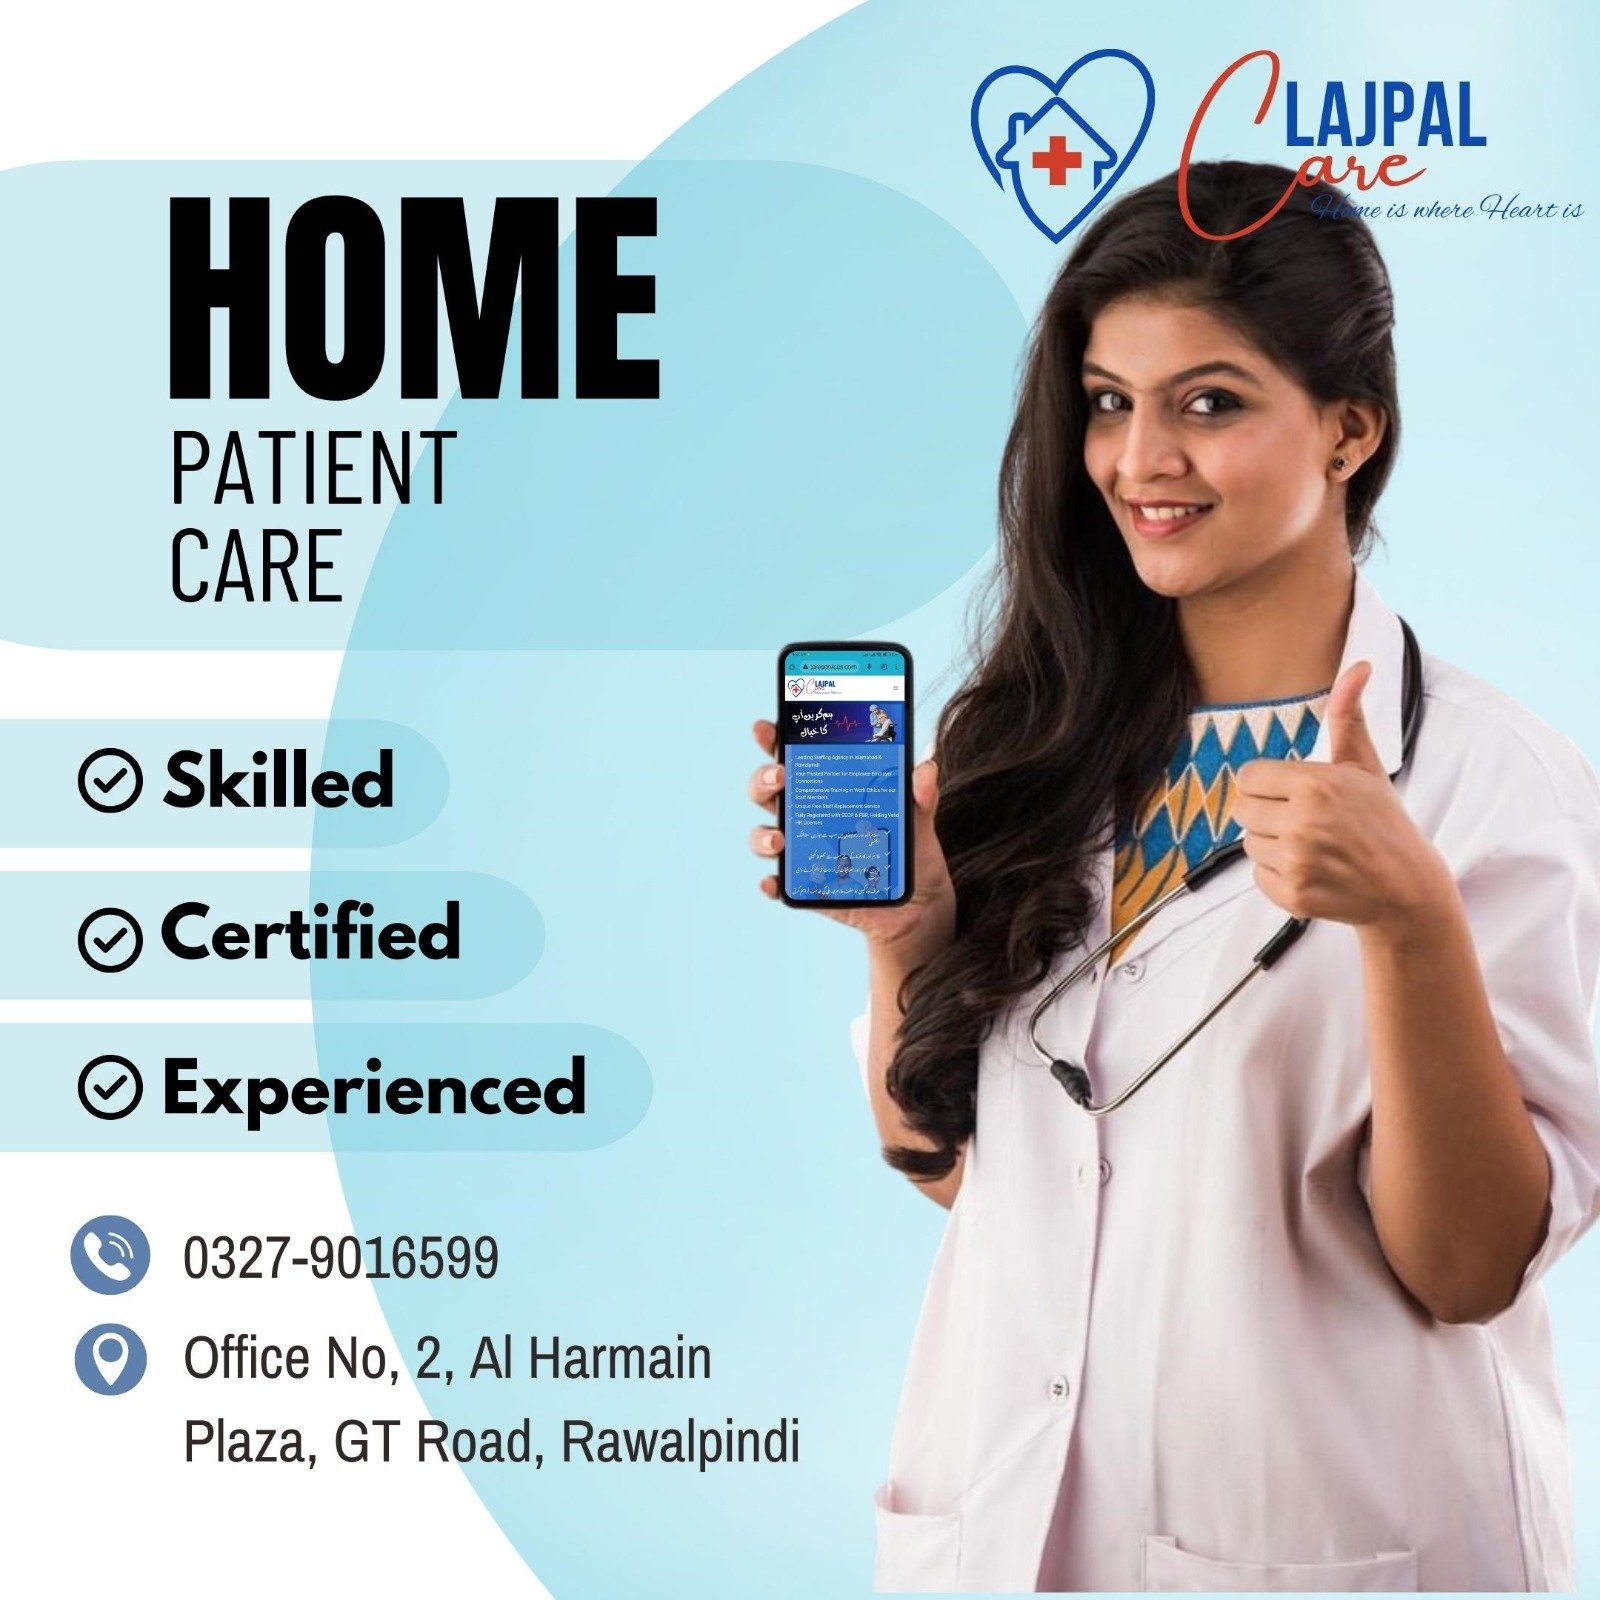 Home Patient Care Services in Rawalpindi